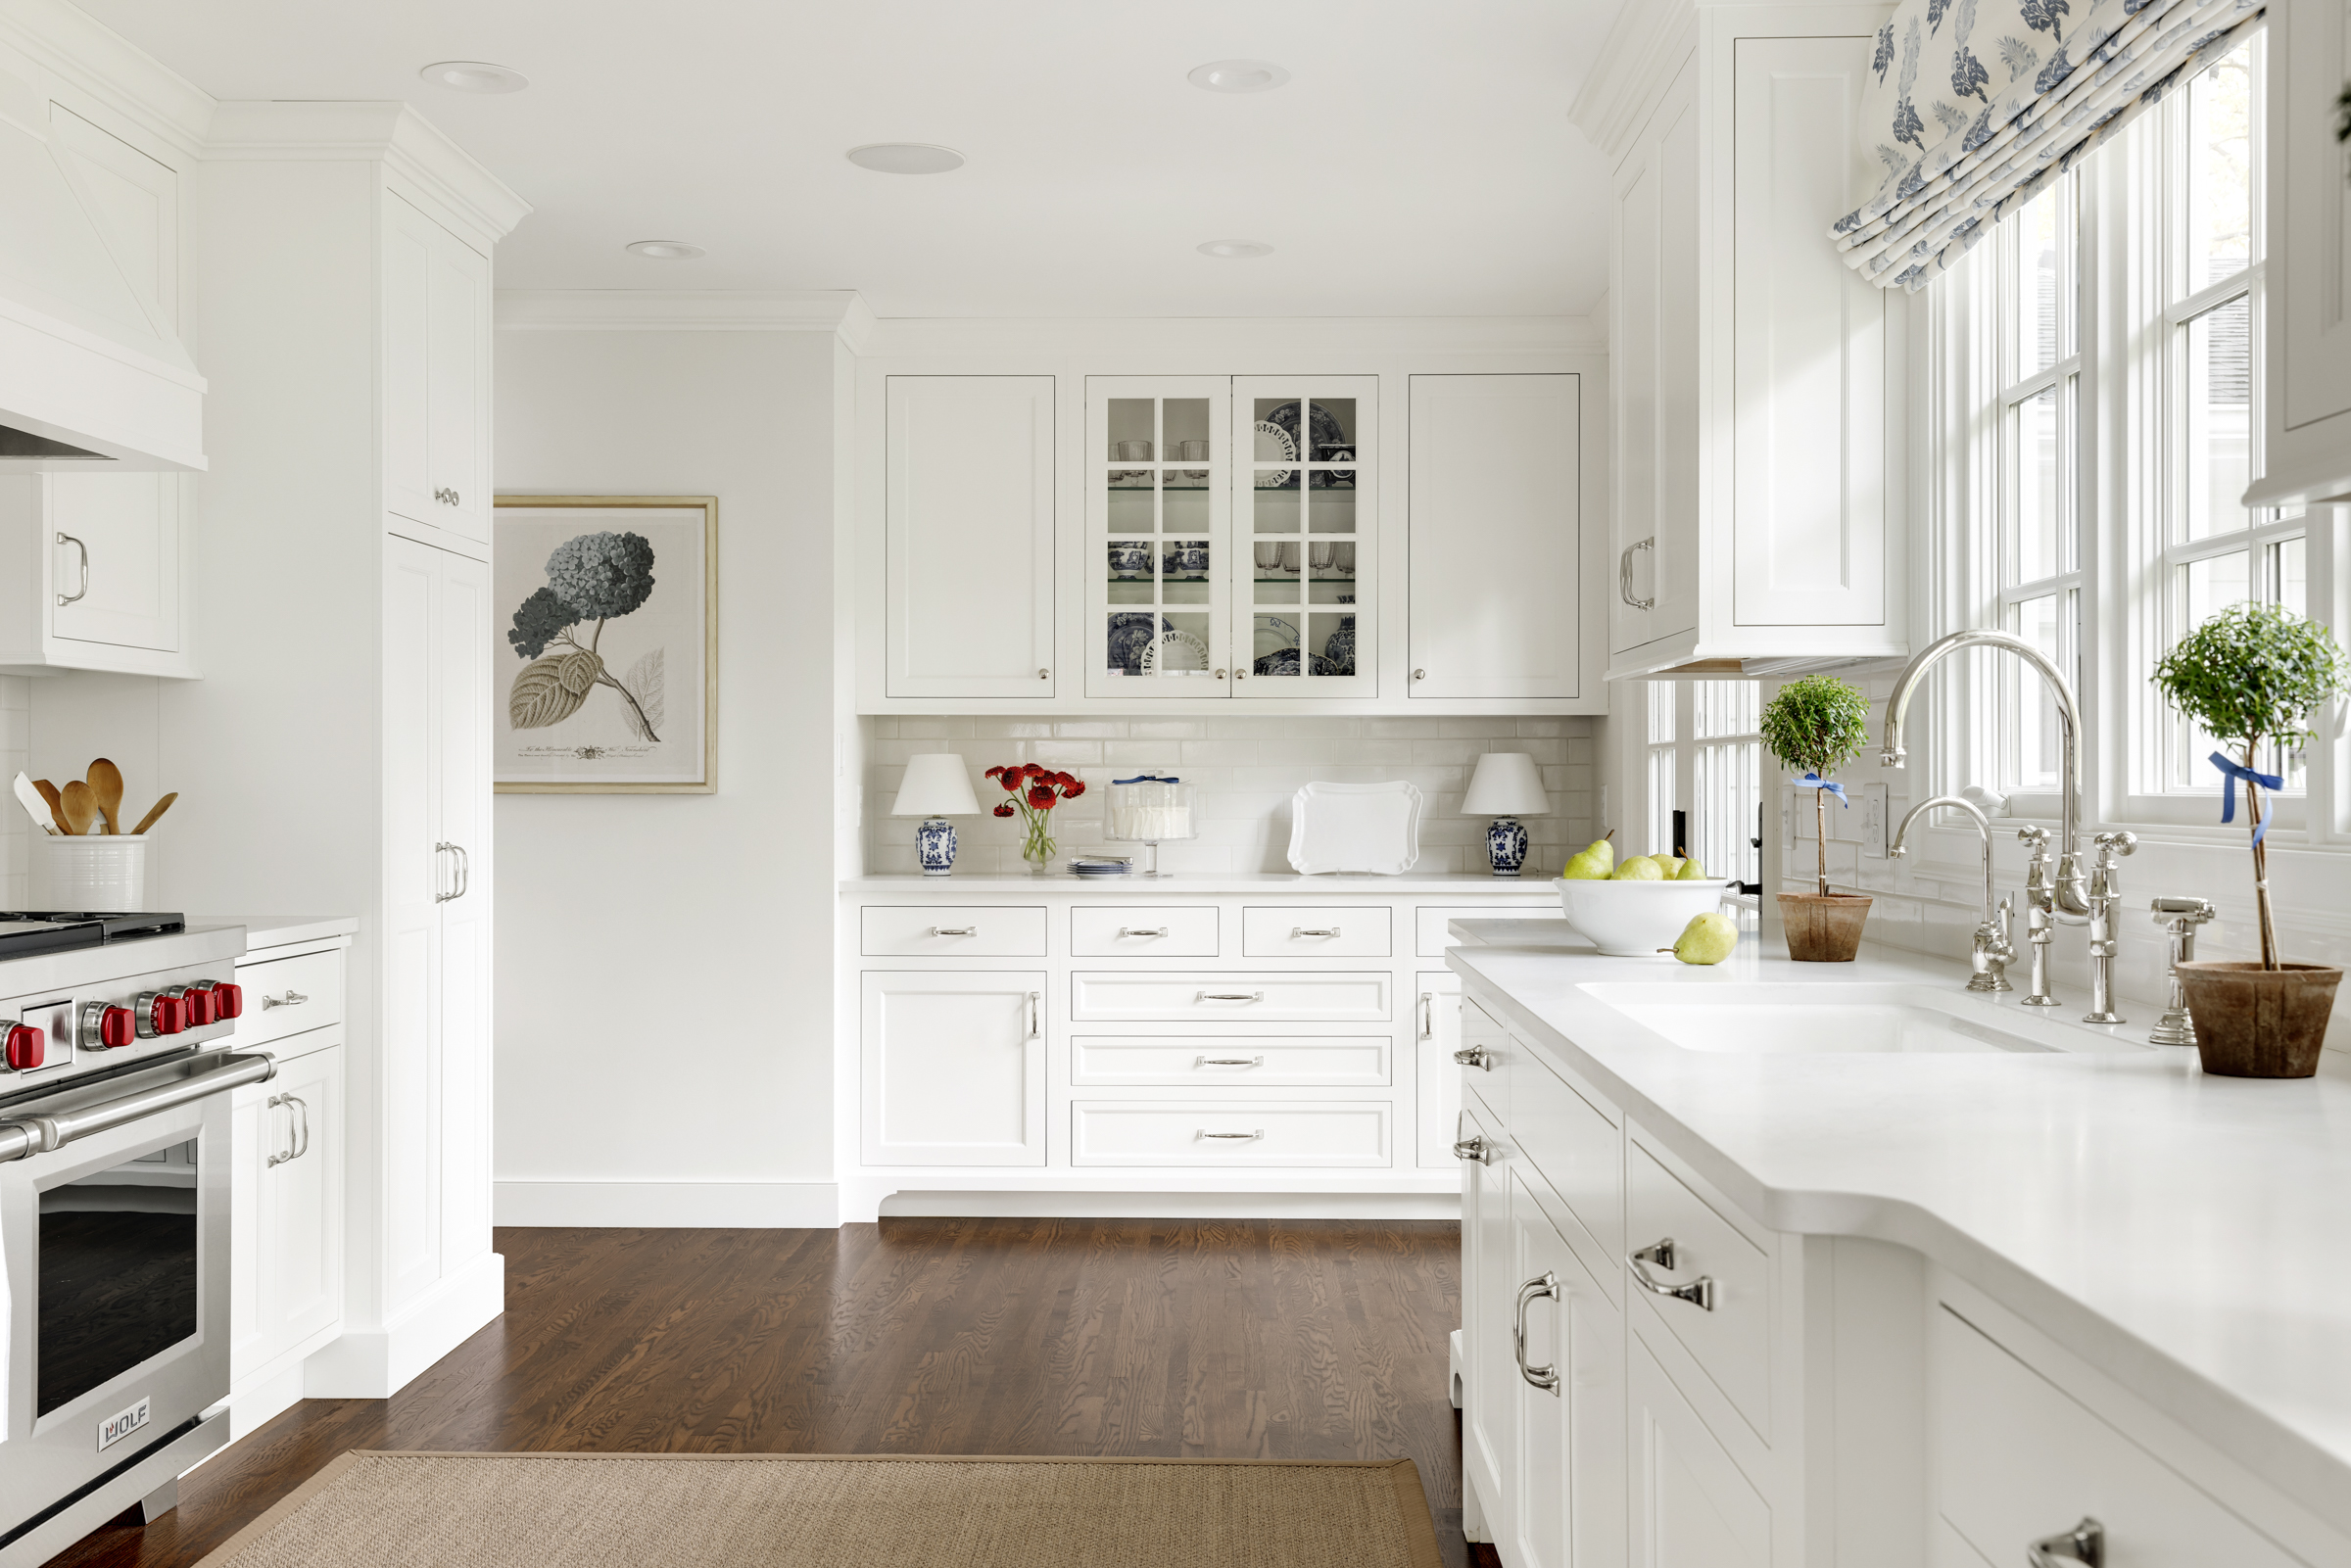 Kitchen remodel with white cabinets and wood floor. Glass upper cabinet to showcase dishware